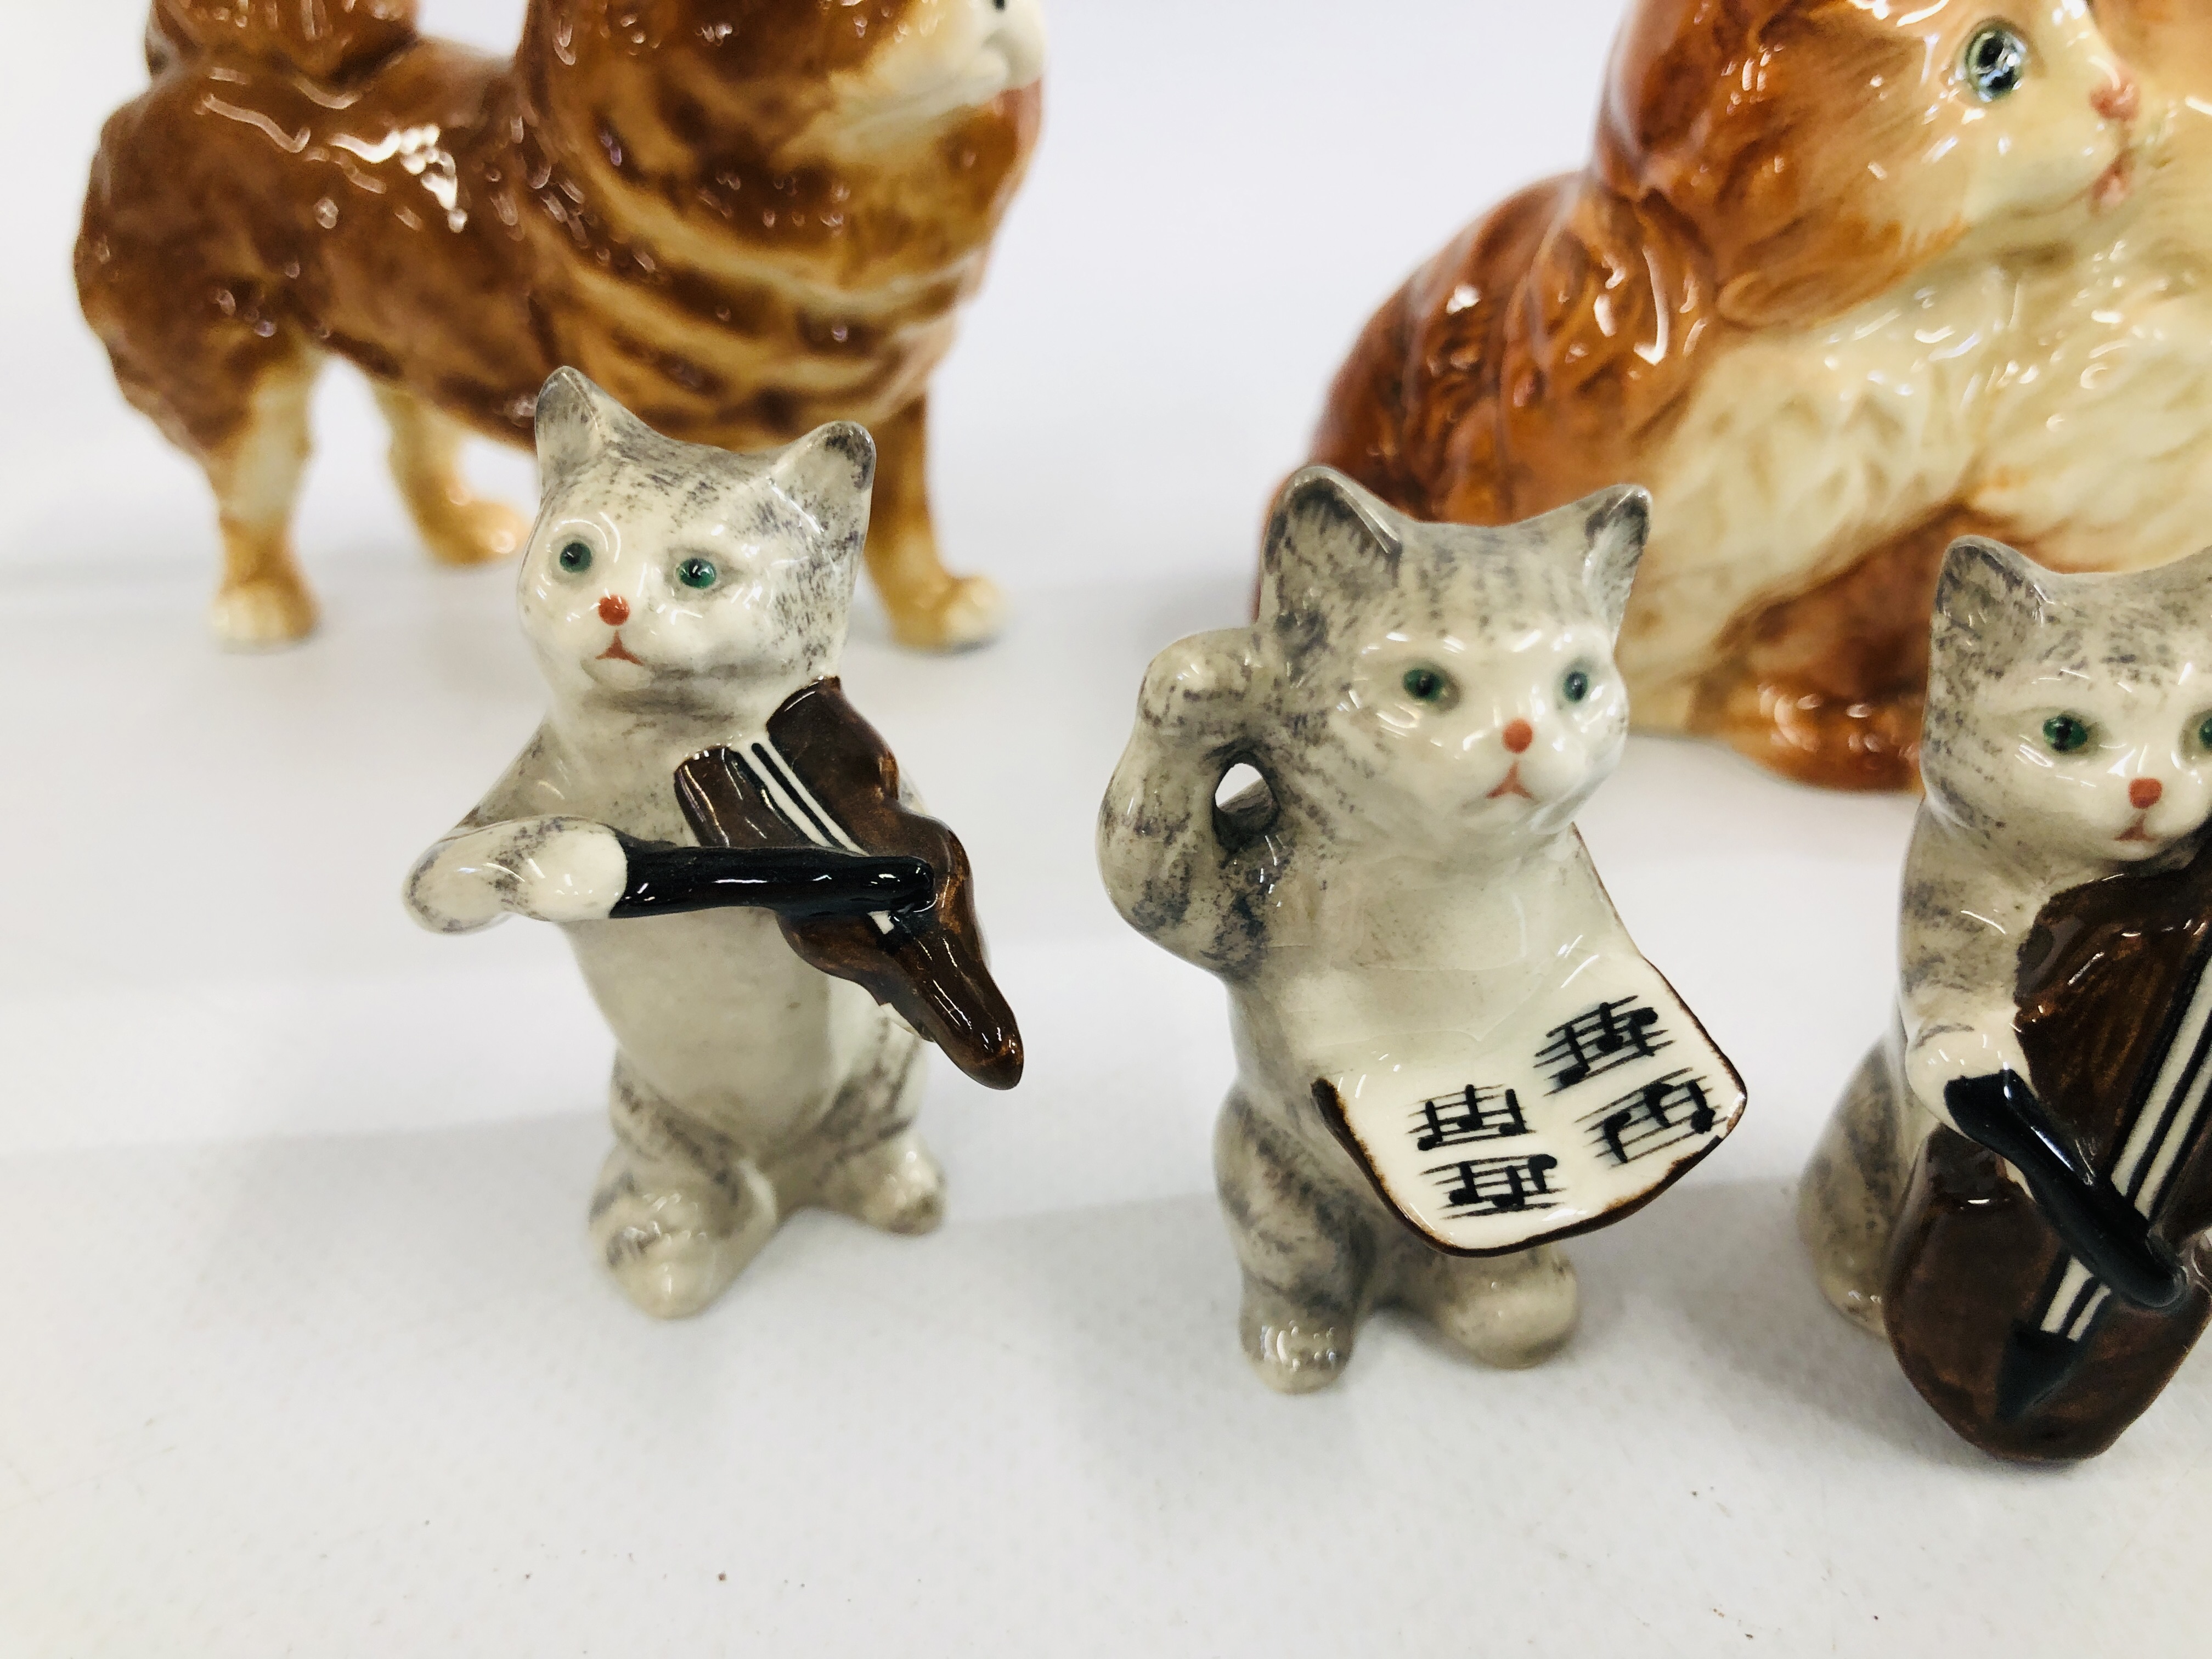 FOUR BESWICK "BANDSMEN" CATS AND BESWICK GINGER CAT ORNAMENT AND CHOW-CHOW DOG ORNAMENT - Image 3 of 9